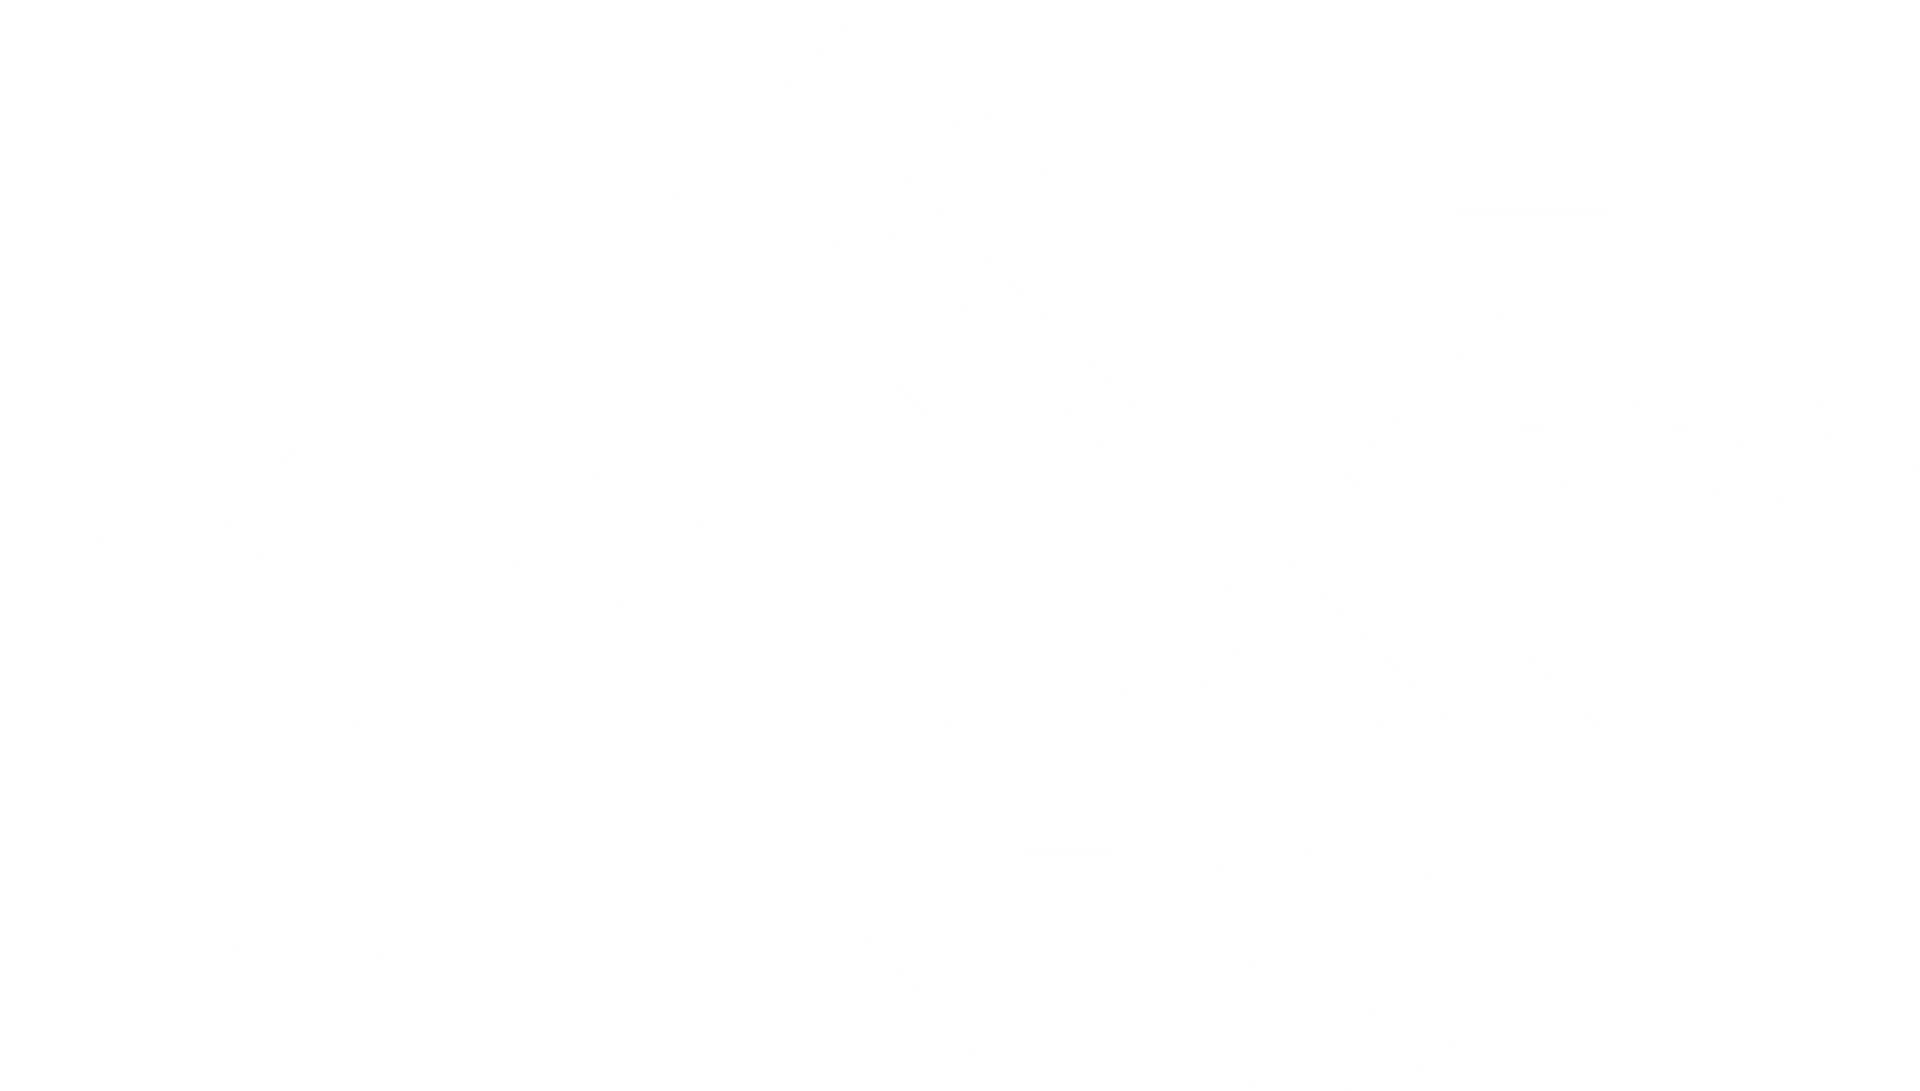 JAX PRO FENCE in white PNG